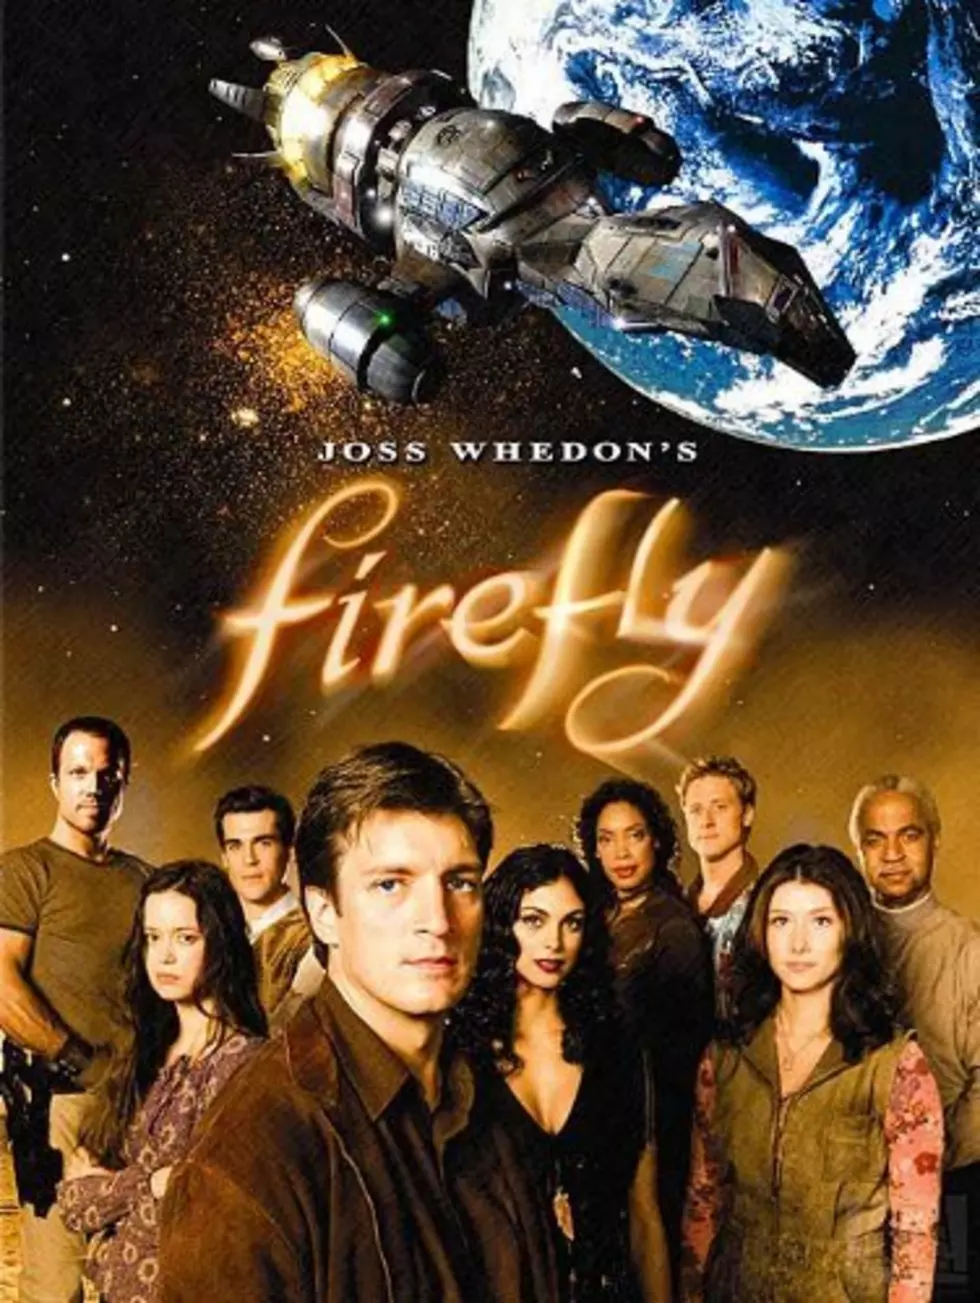 Professor Threatened With Criminal Charges For &#8220;Firefly&#8221; Poster